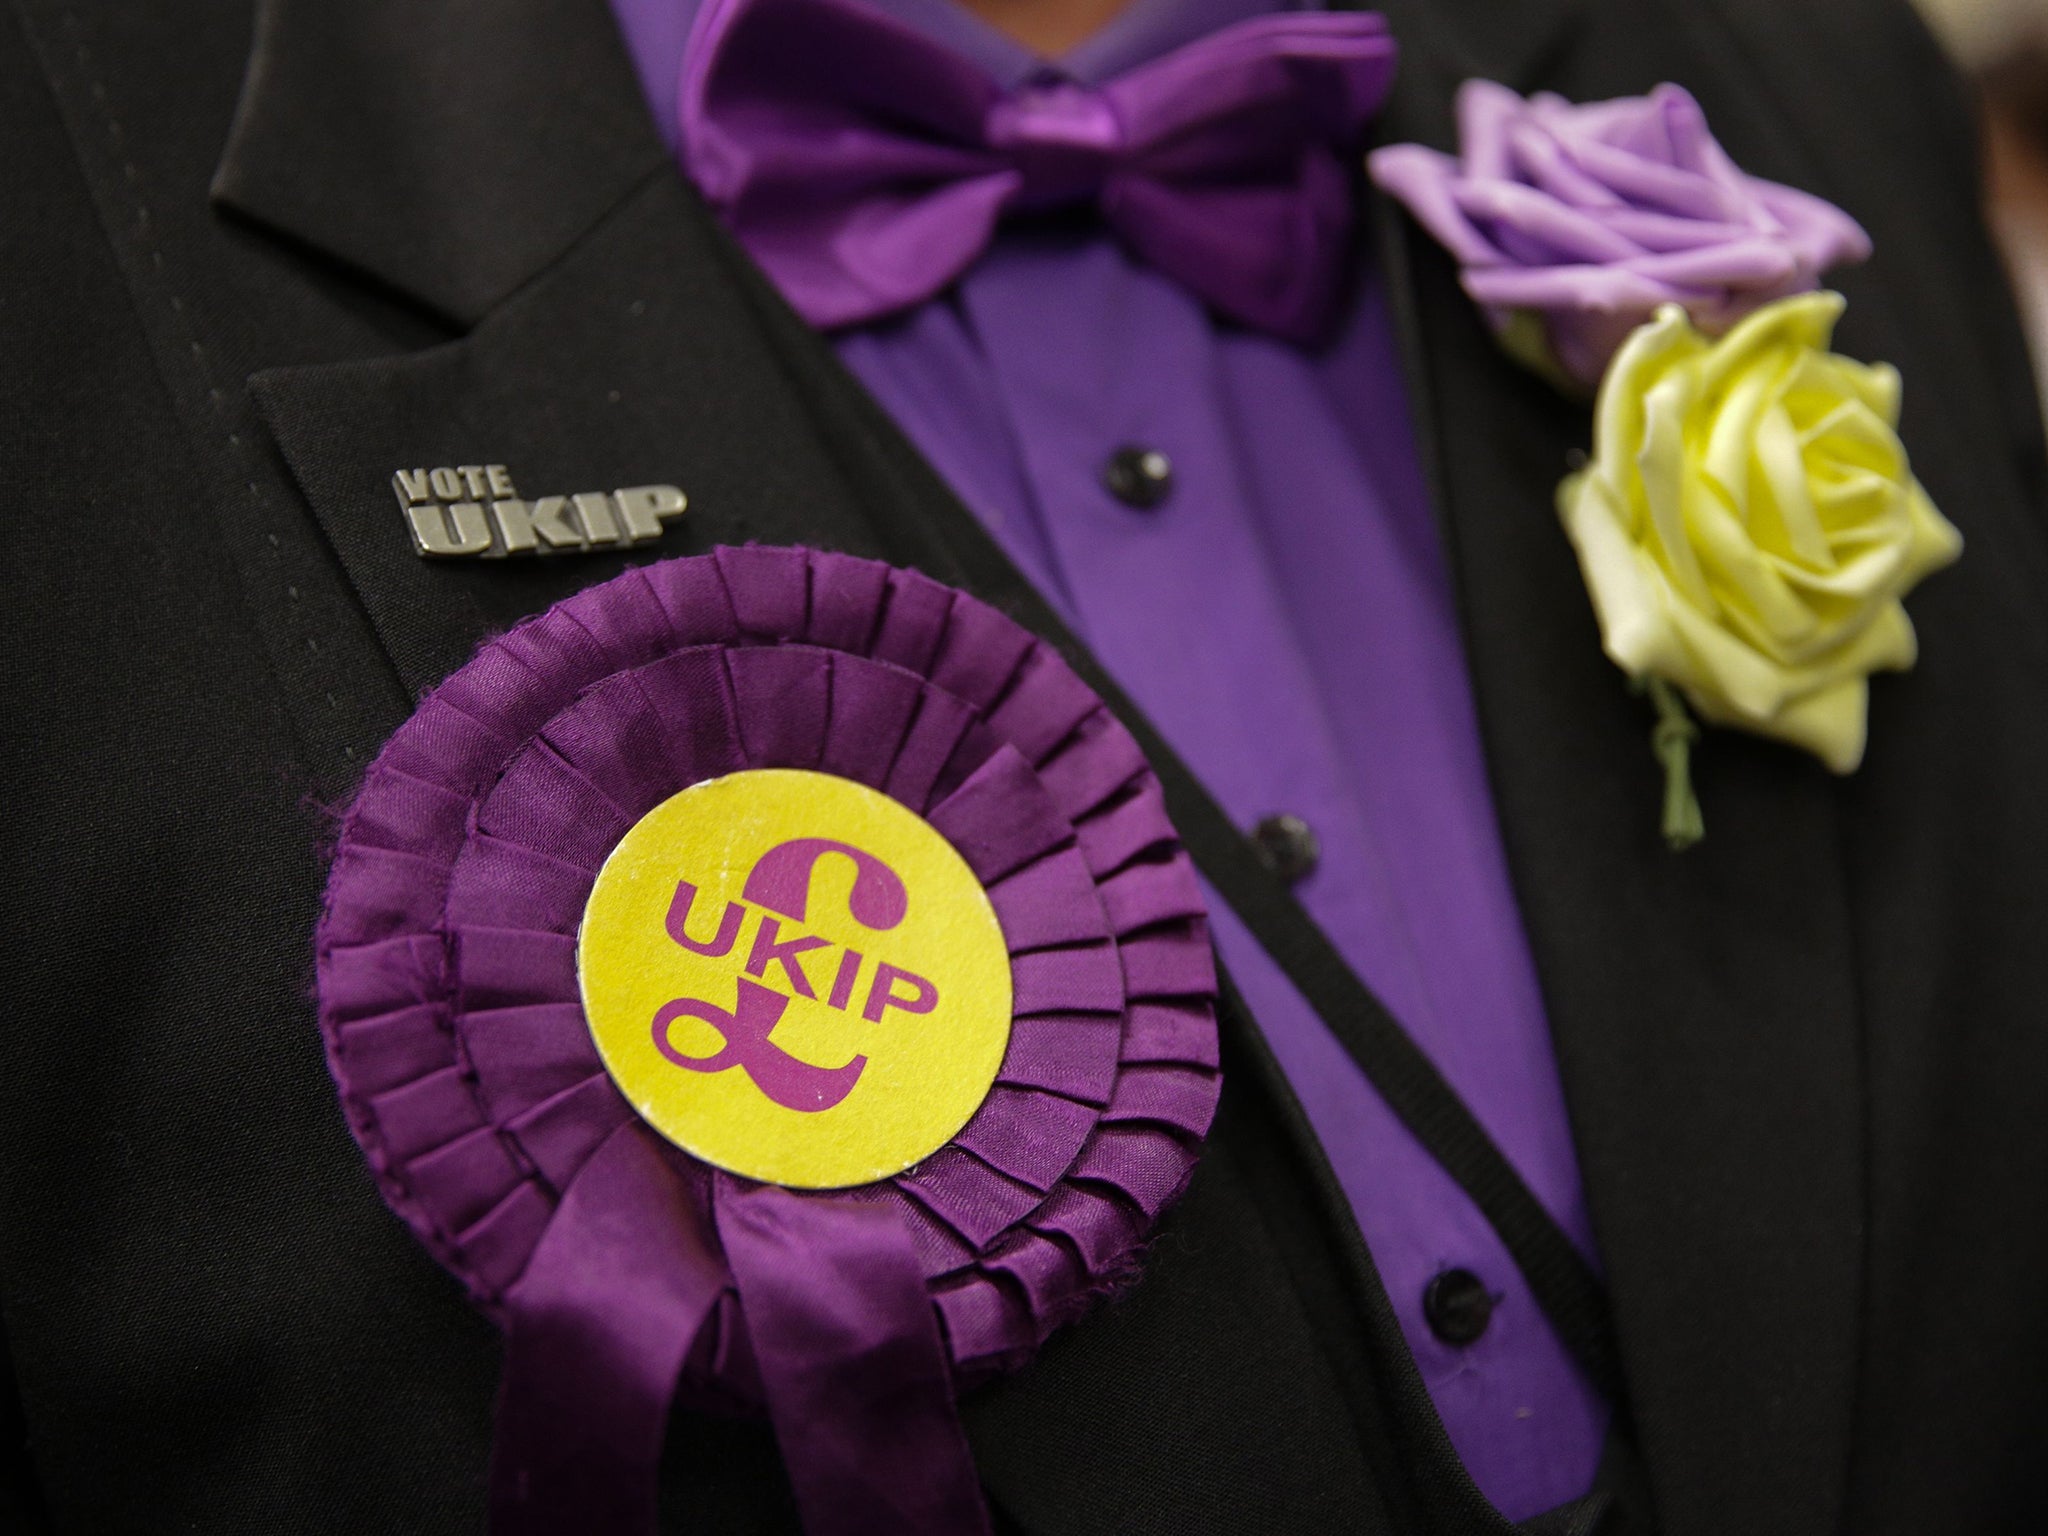 In 2015, Ukip gained 10 per cent more votes than in 2010